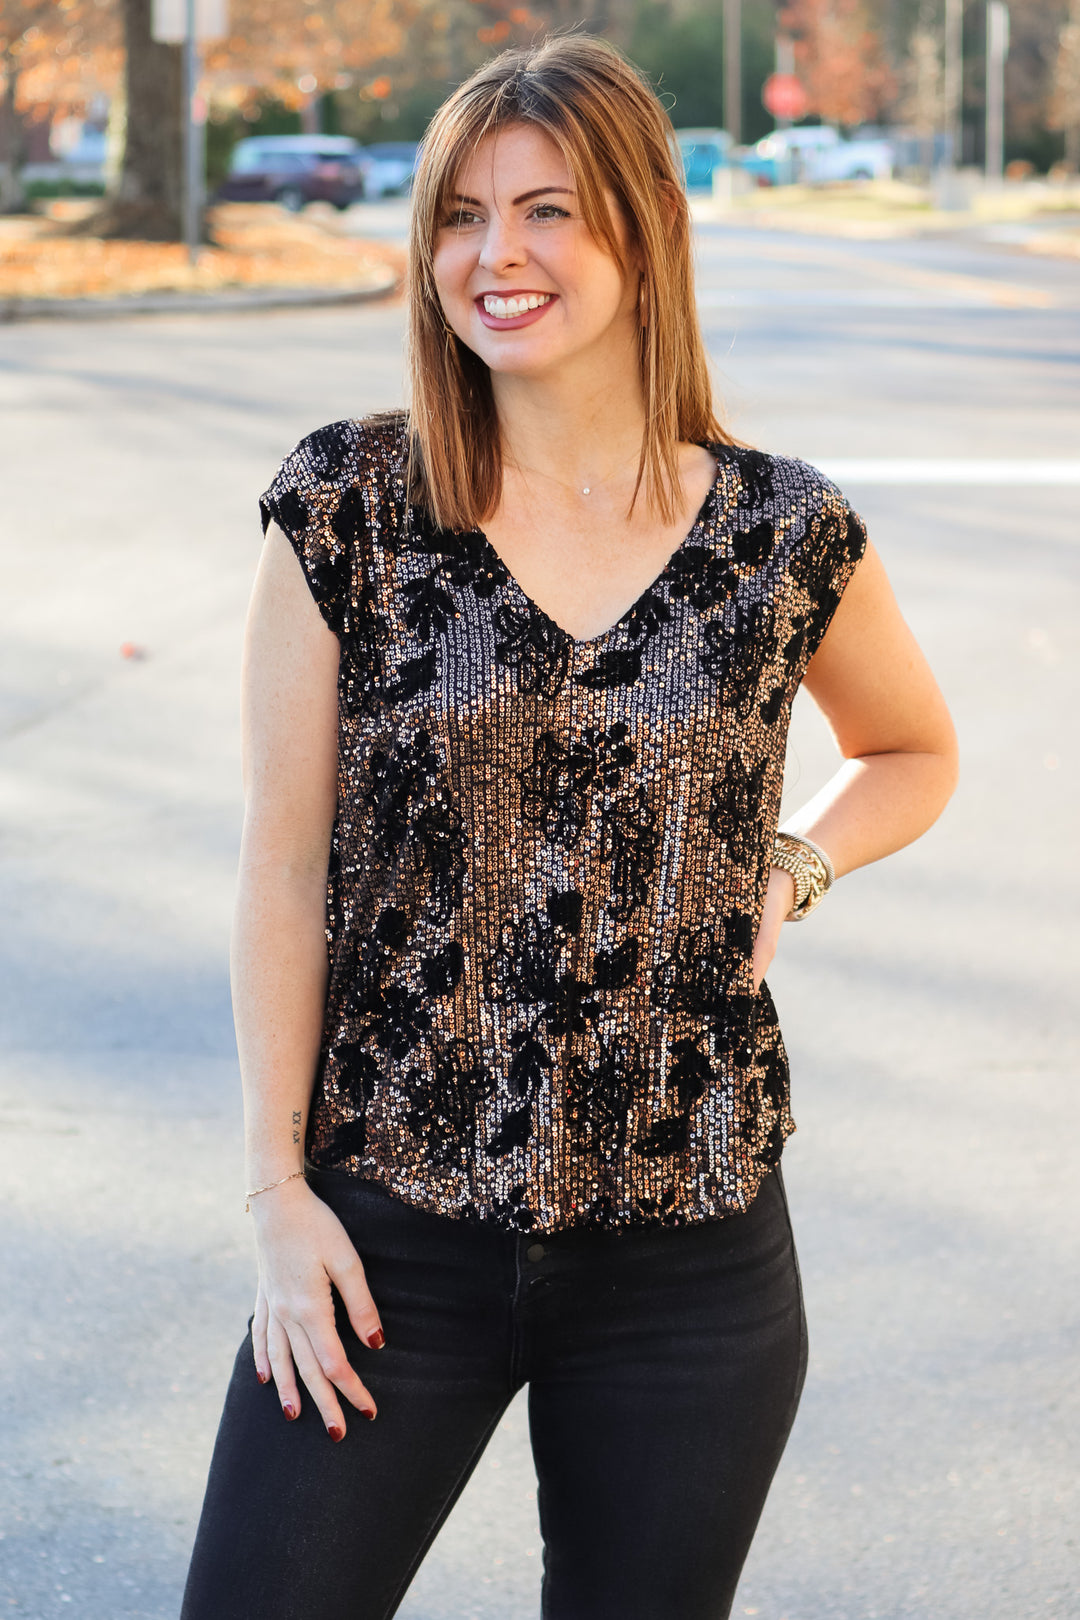 A brunette woman standing outside wearing a cap sleeve rose gold and black sequin top with a v neck and black jeans.